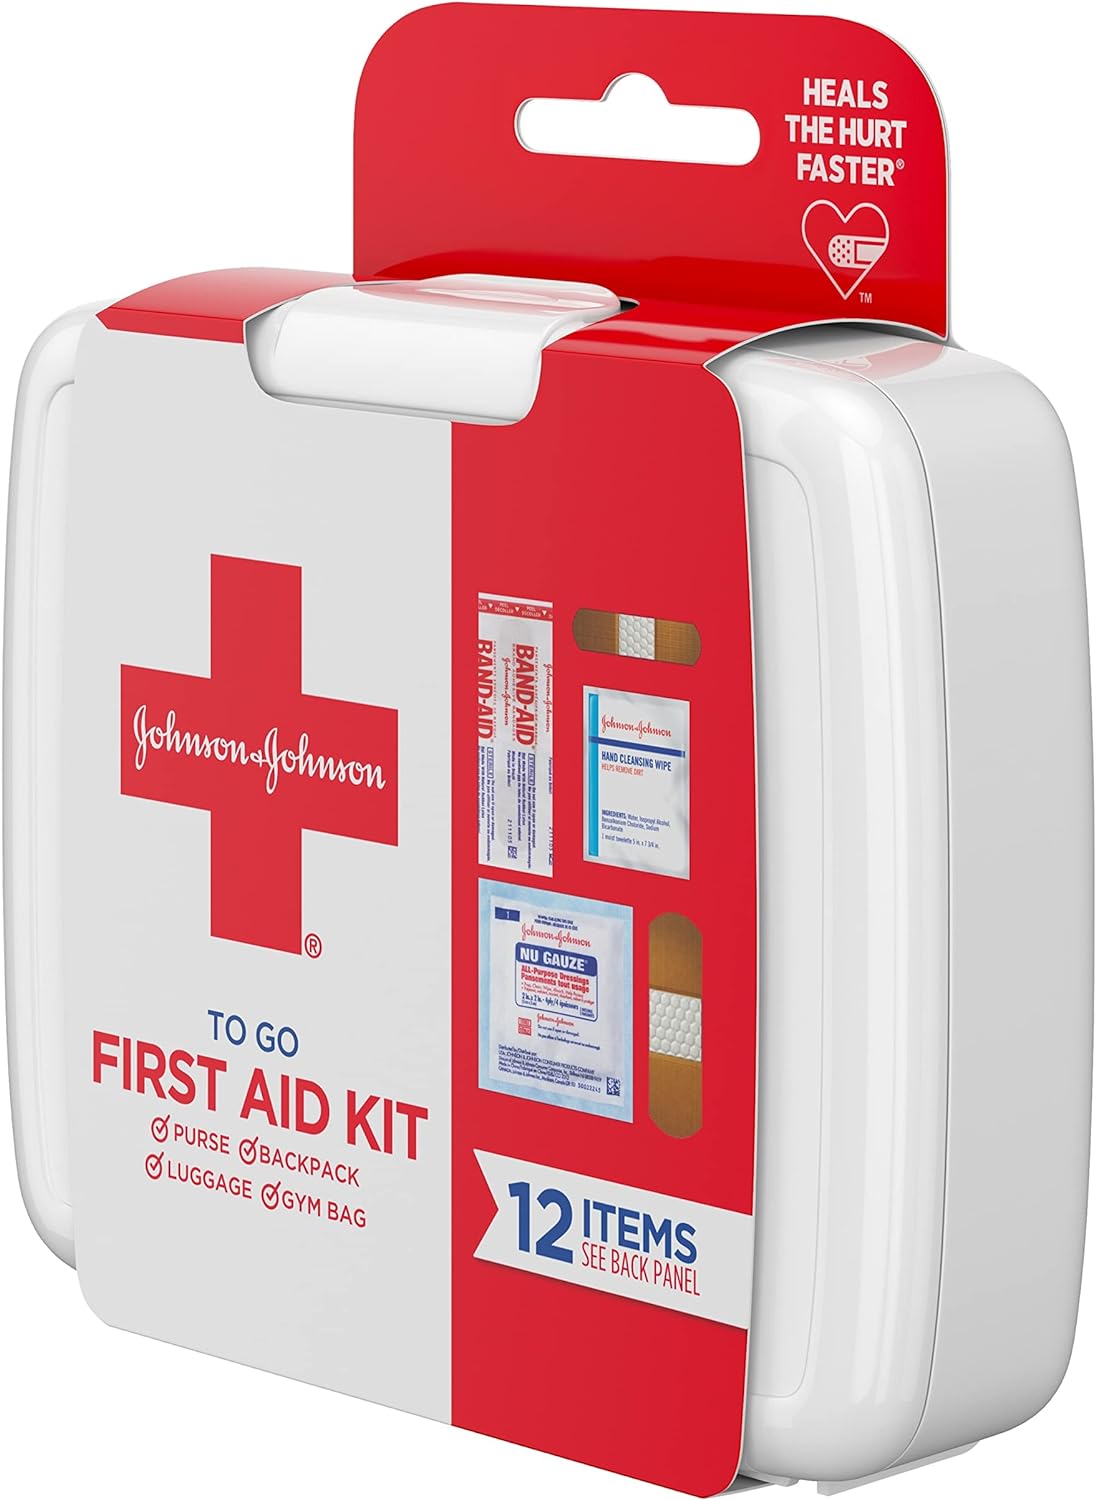 J&J Red Cross First Aid To Go Mini Portable Emergency Wound Care Travel Kit with Adhesive Bandages, Gauze Pads & Wipes for Purse, Backpack, Gym Bag, Car or Luggage, 12 Count